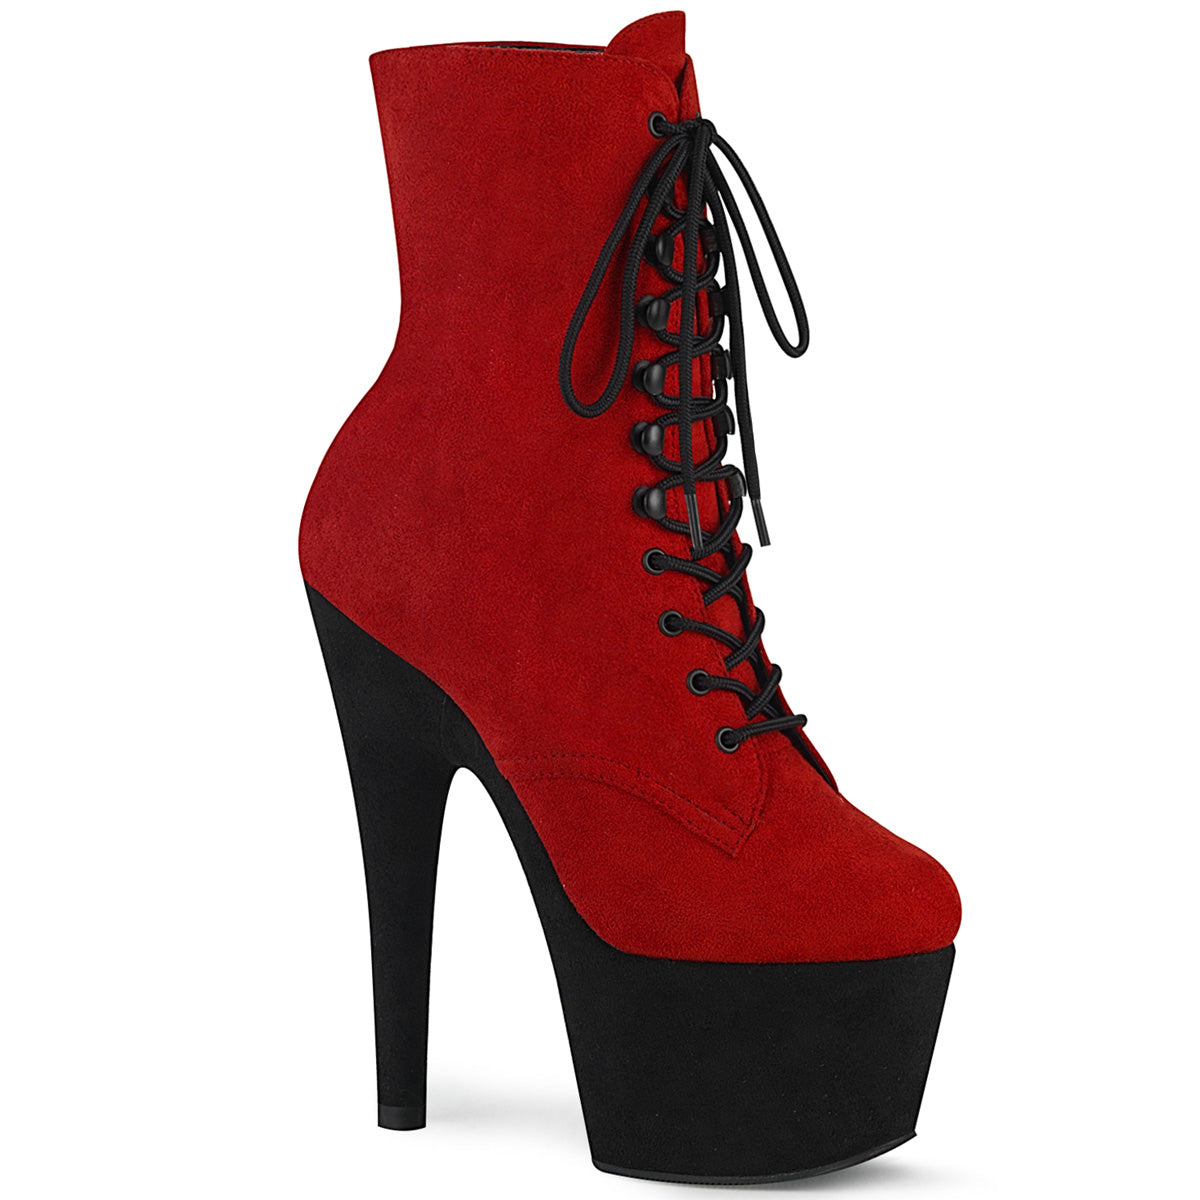 ADORE-1020FSTT Pleasers 7" Heel Red Exotic Dancing Ankle Boot